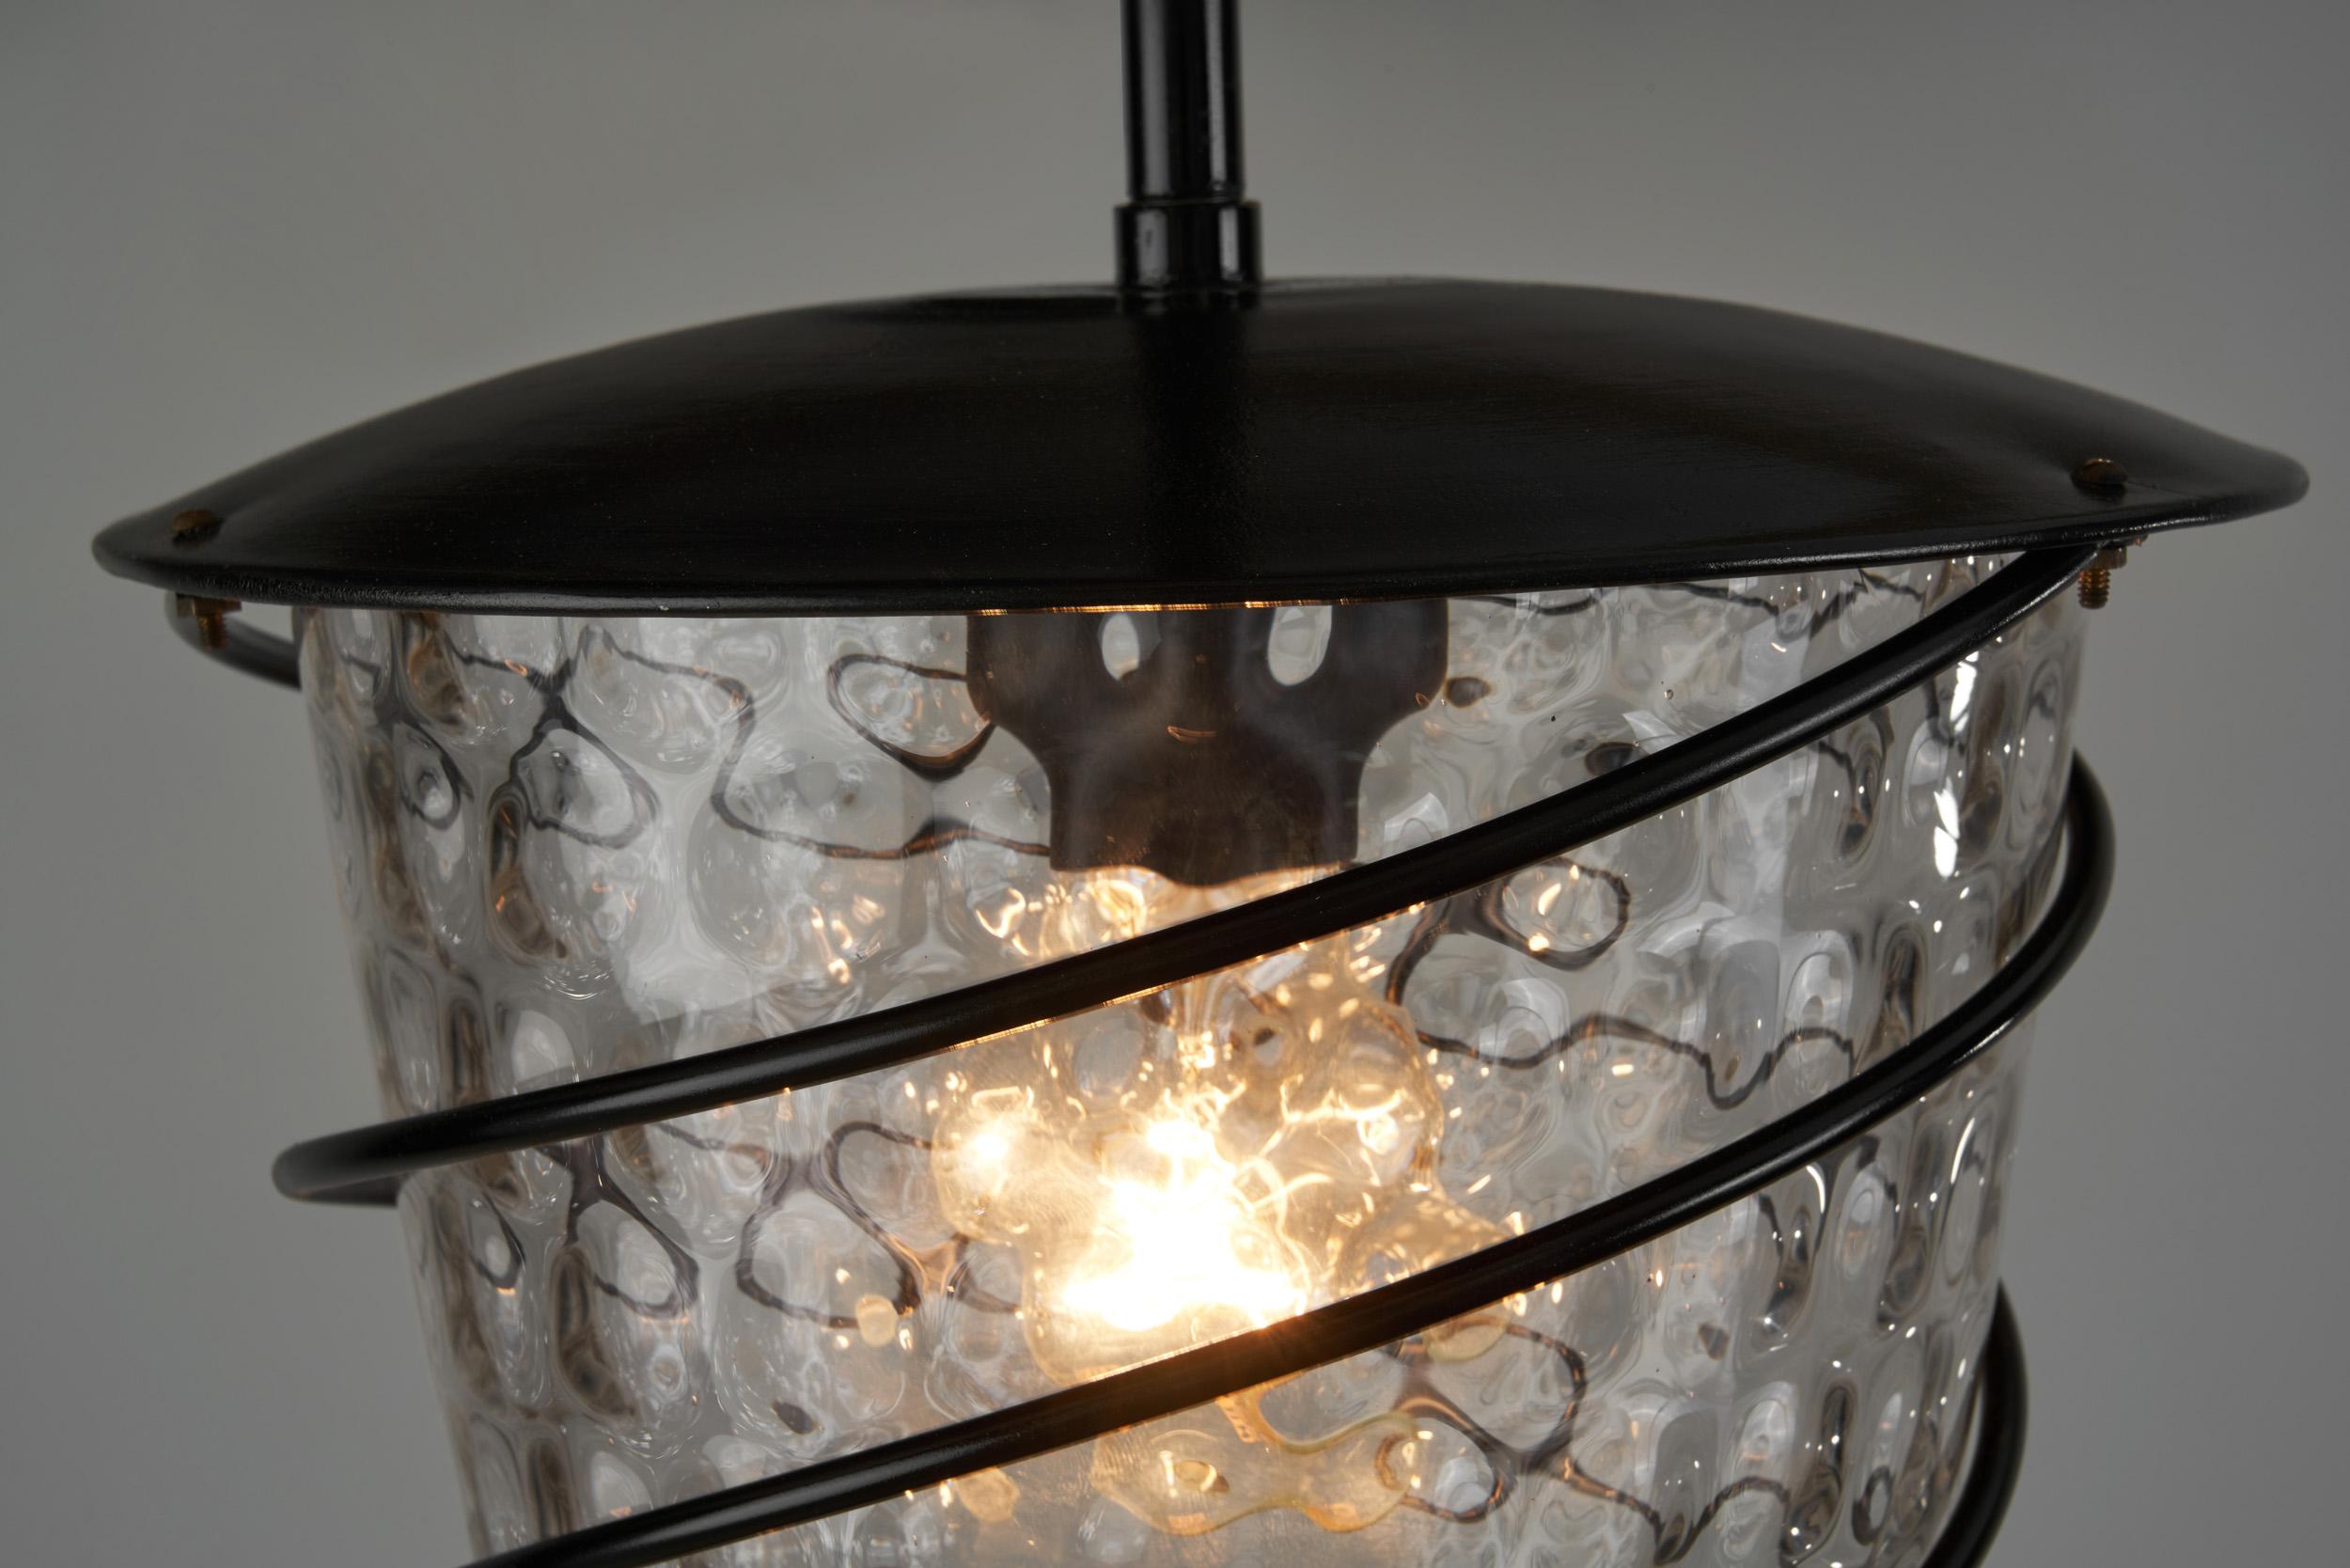 Scandinavian Tin and Glass Accent Ceiling Lamp, Scandinavia, 1920s For Sale 3